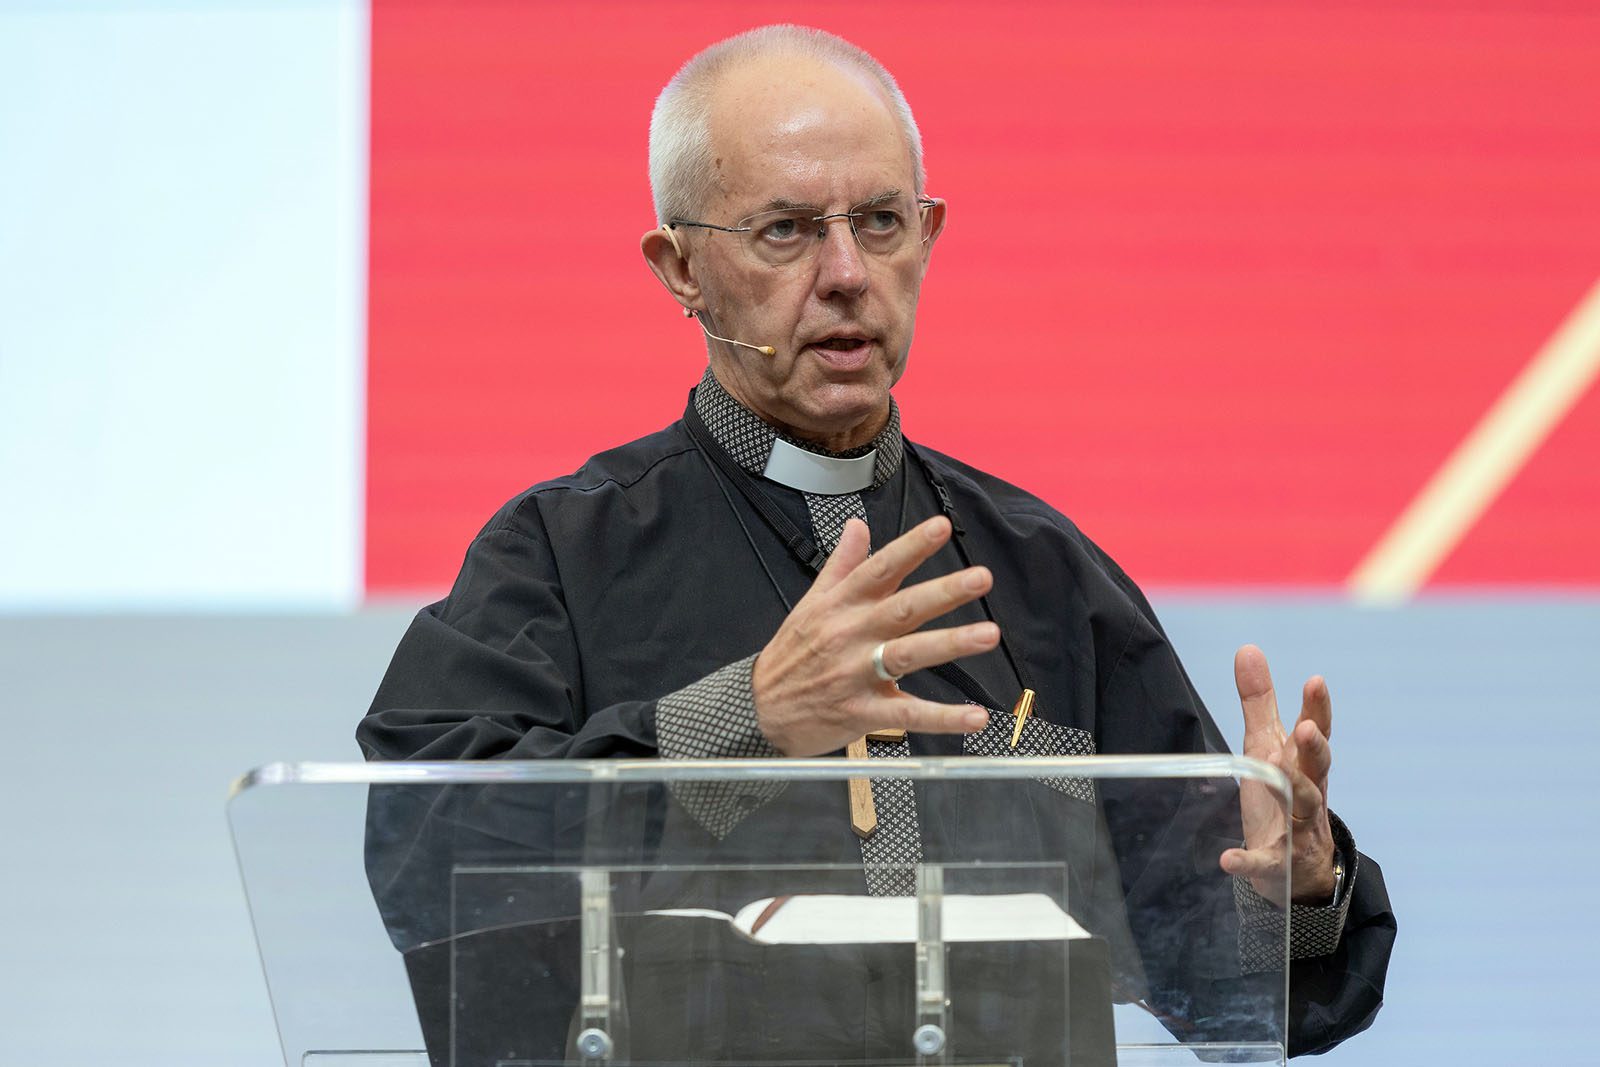 Justin Welby, Archbishop of Canterbury, addresses the Bible exhibition 